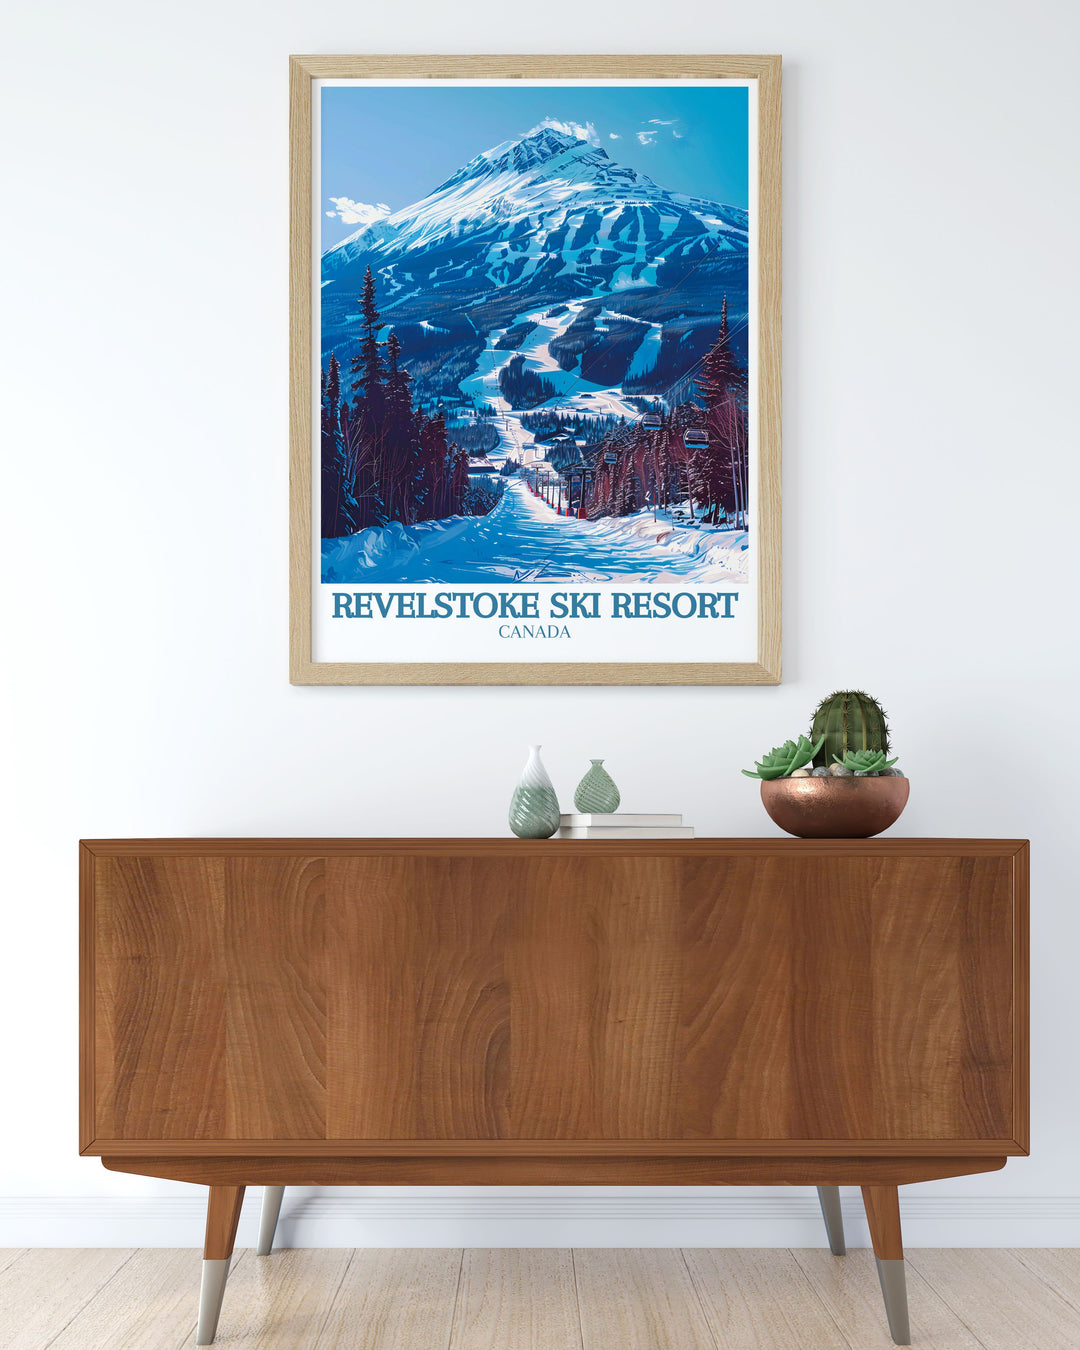 Canada Travel Poster featuring the majestic Mount Mackenzie and the Revelation Gondola cable car. This Ski Resort Print is ideal for adding a touch of adventure and elegance to any room, perfect for ski lovers and nature enthusiasts.